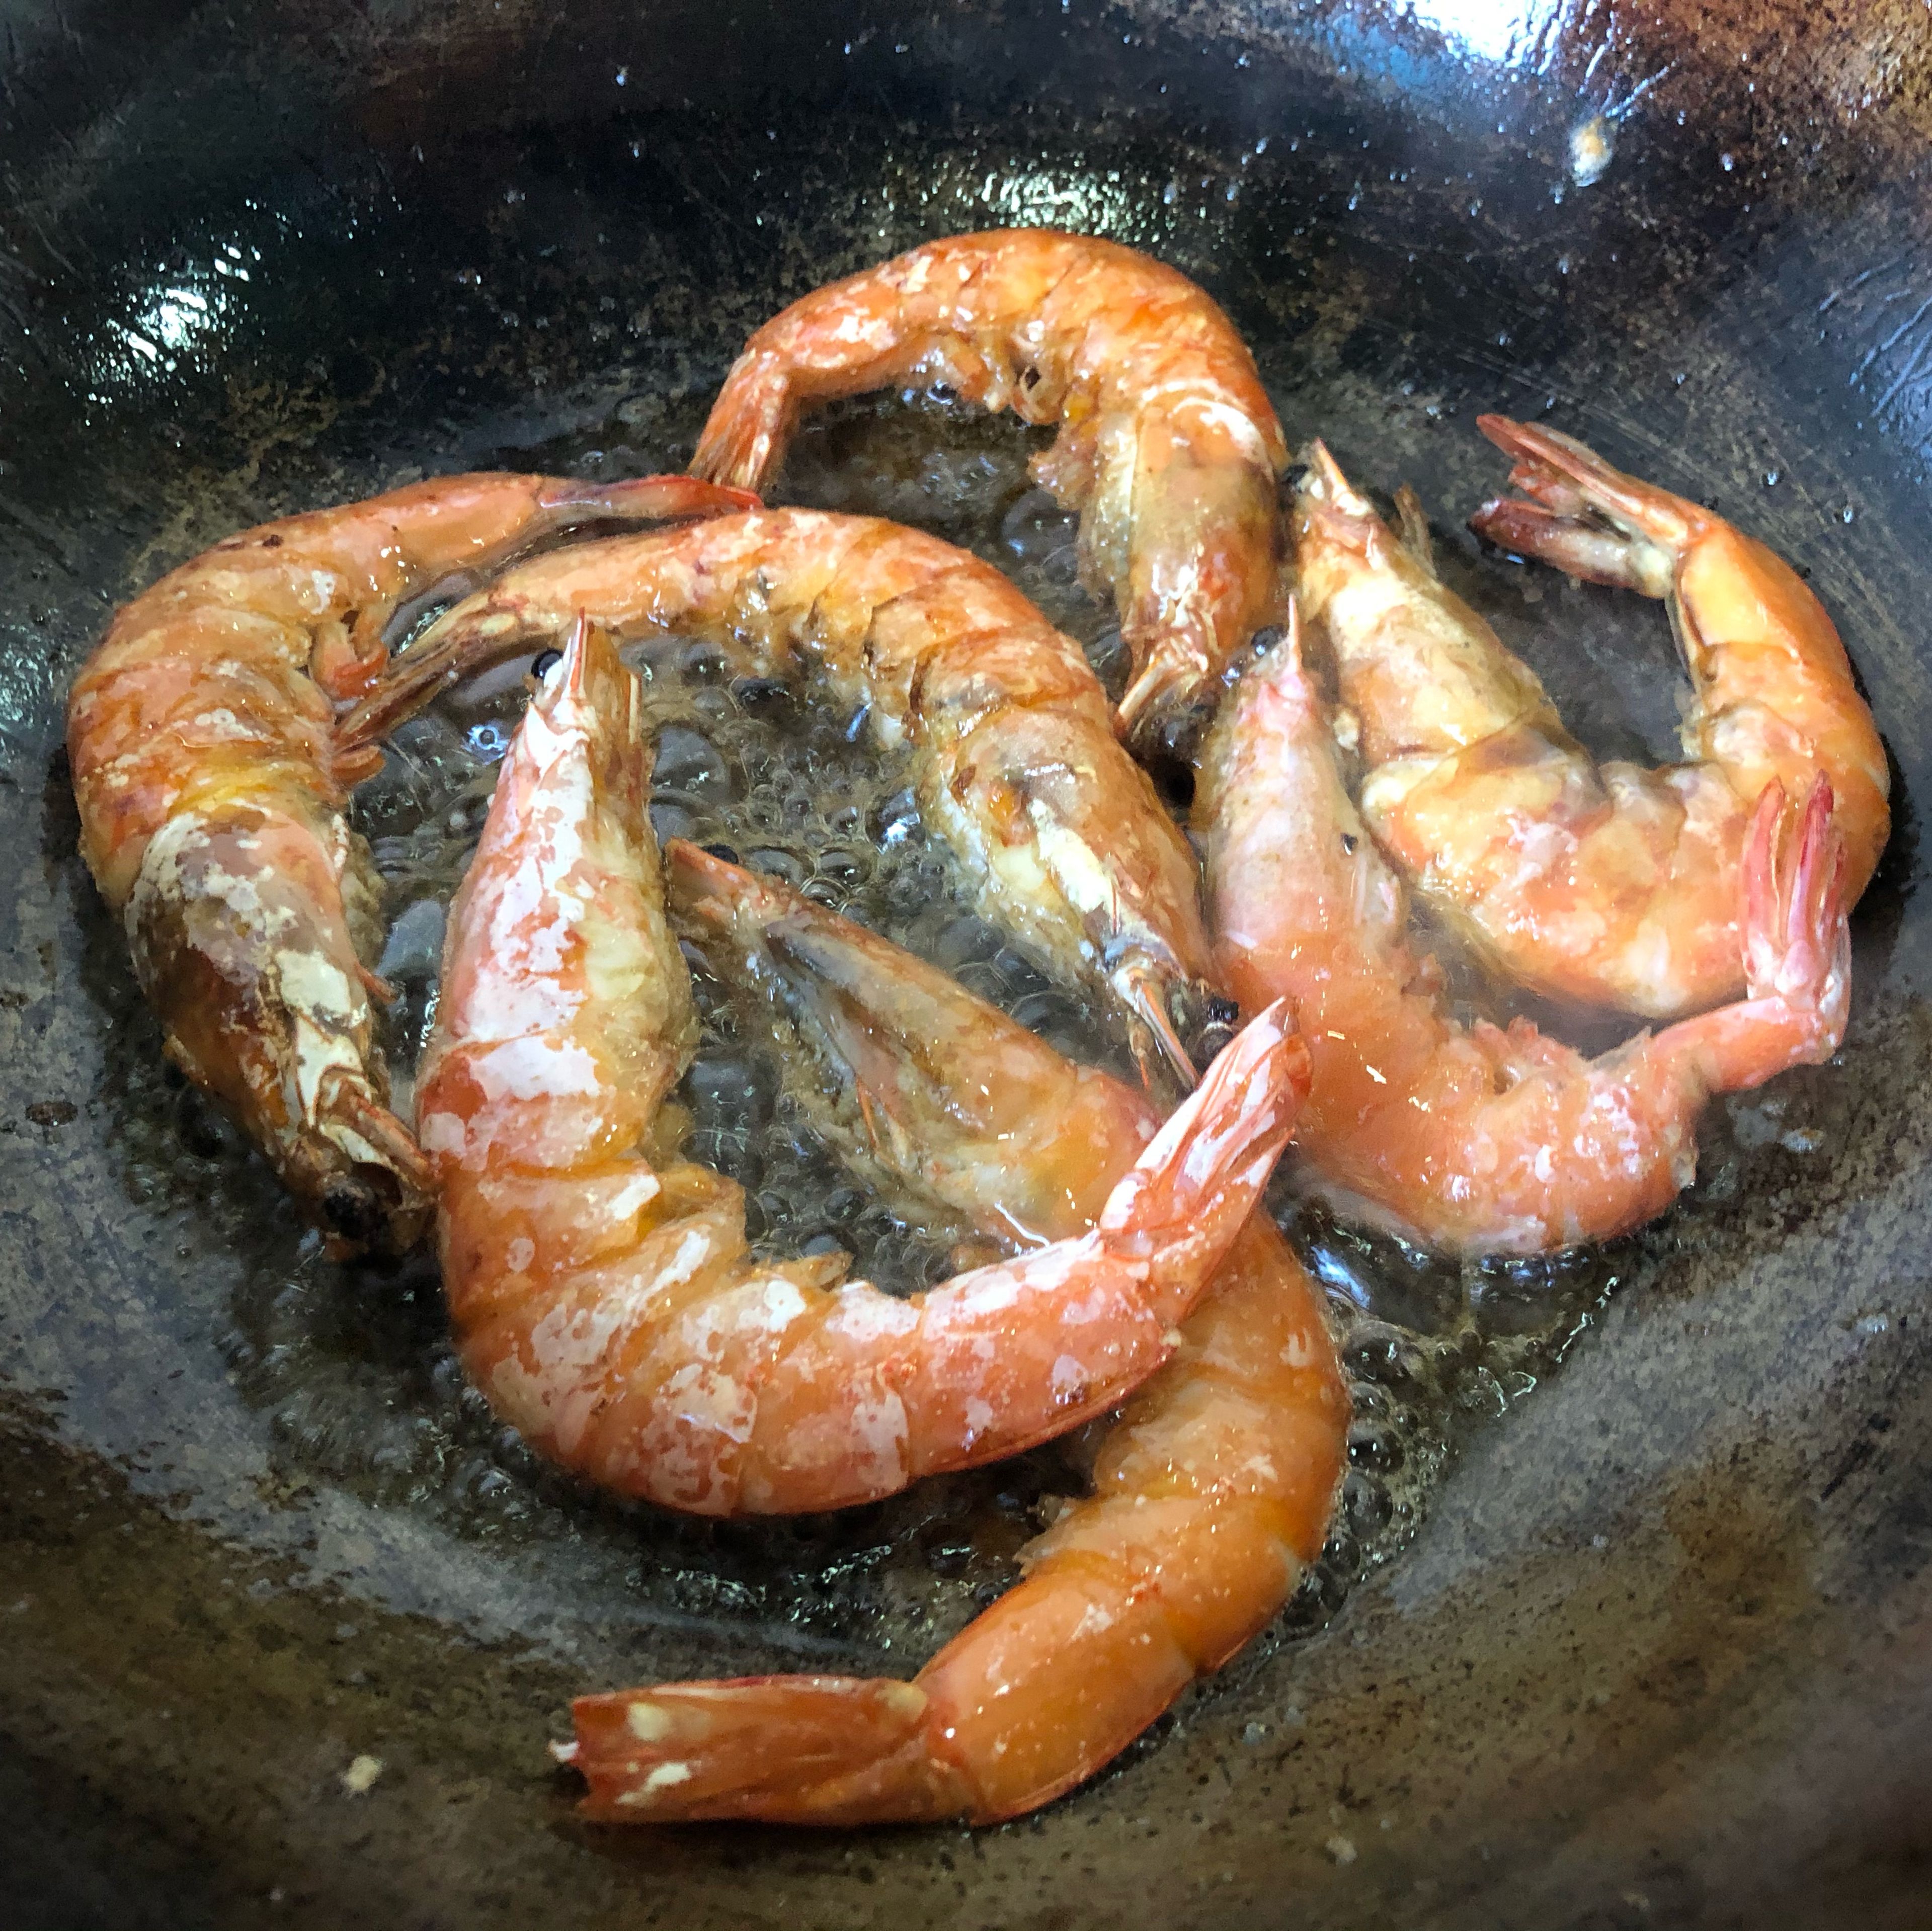 Fry the prawns in a pan until reddish oil is released.